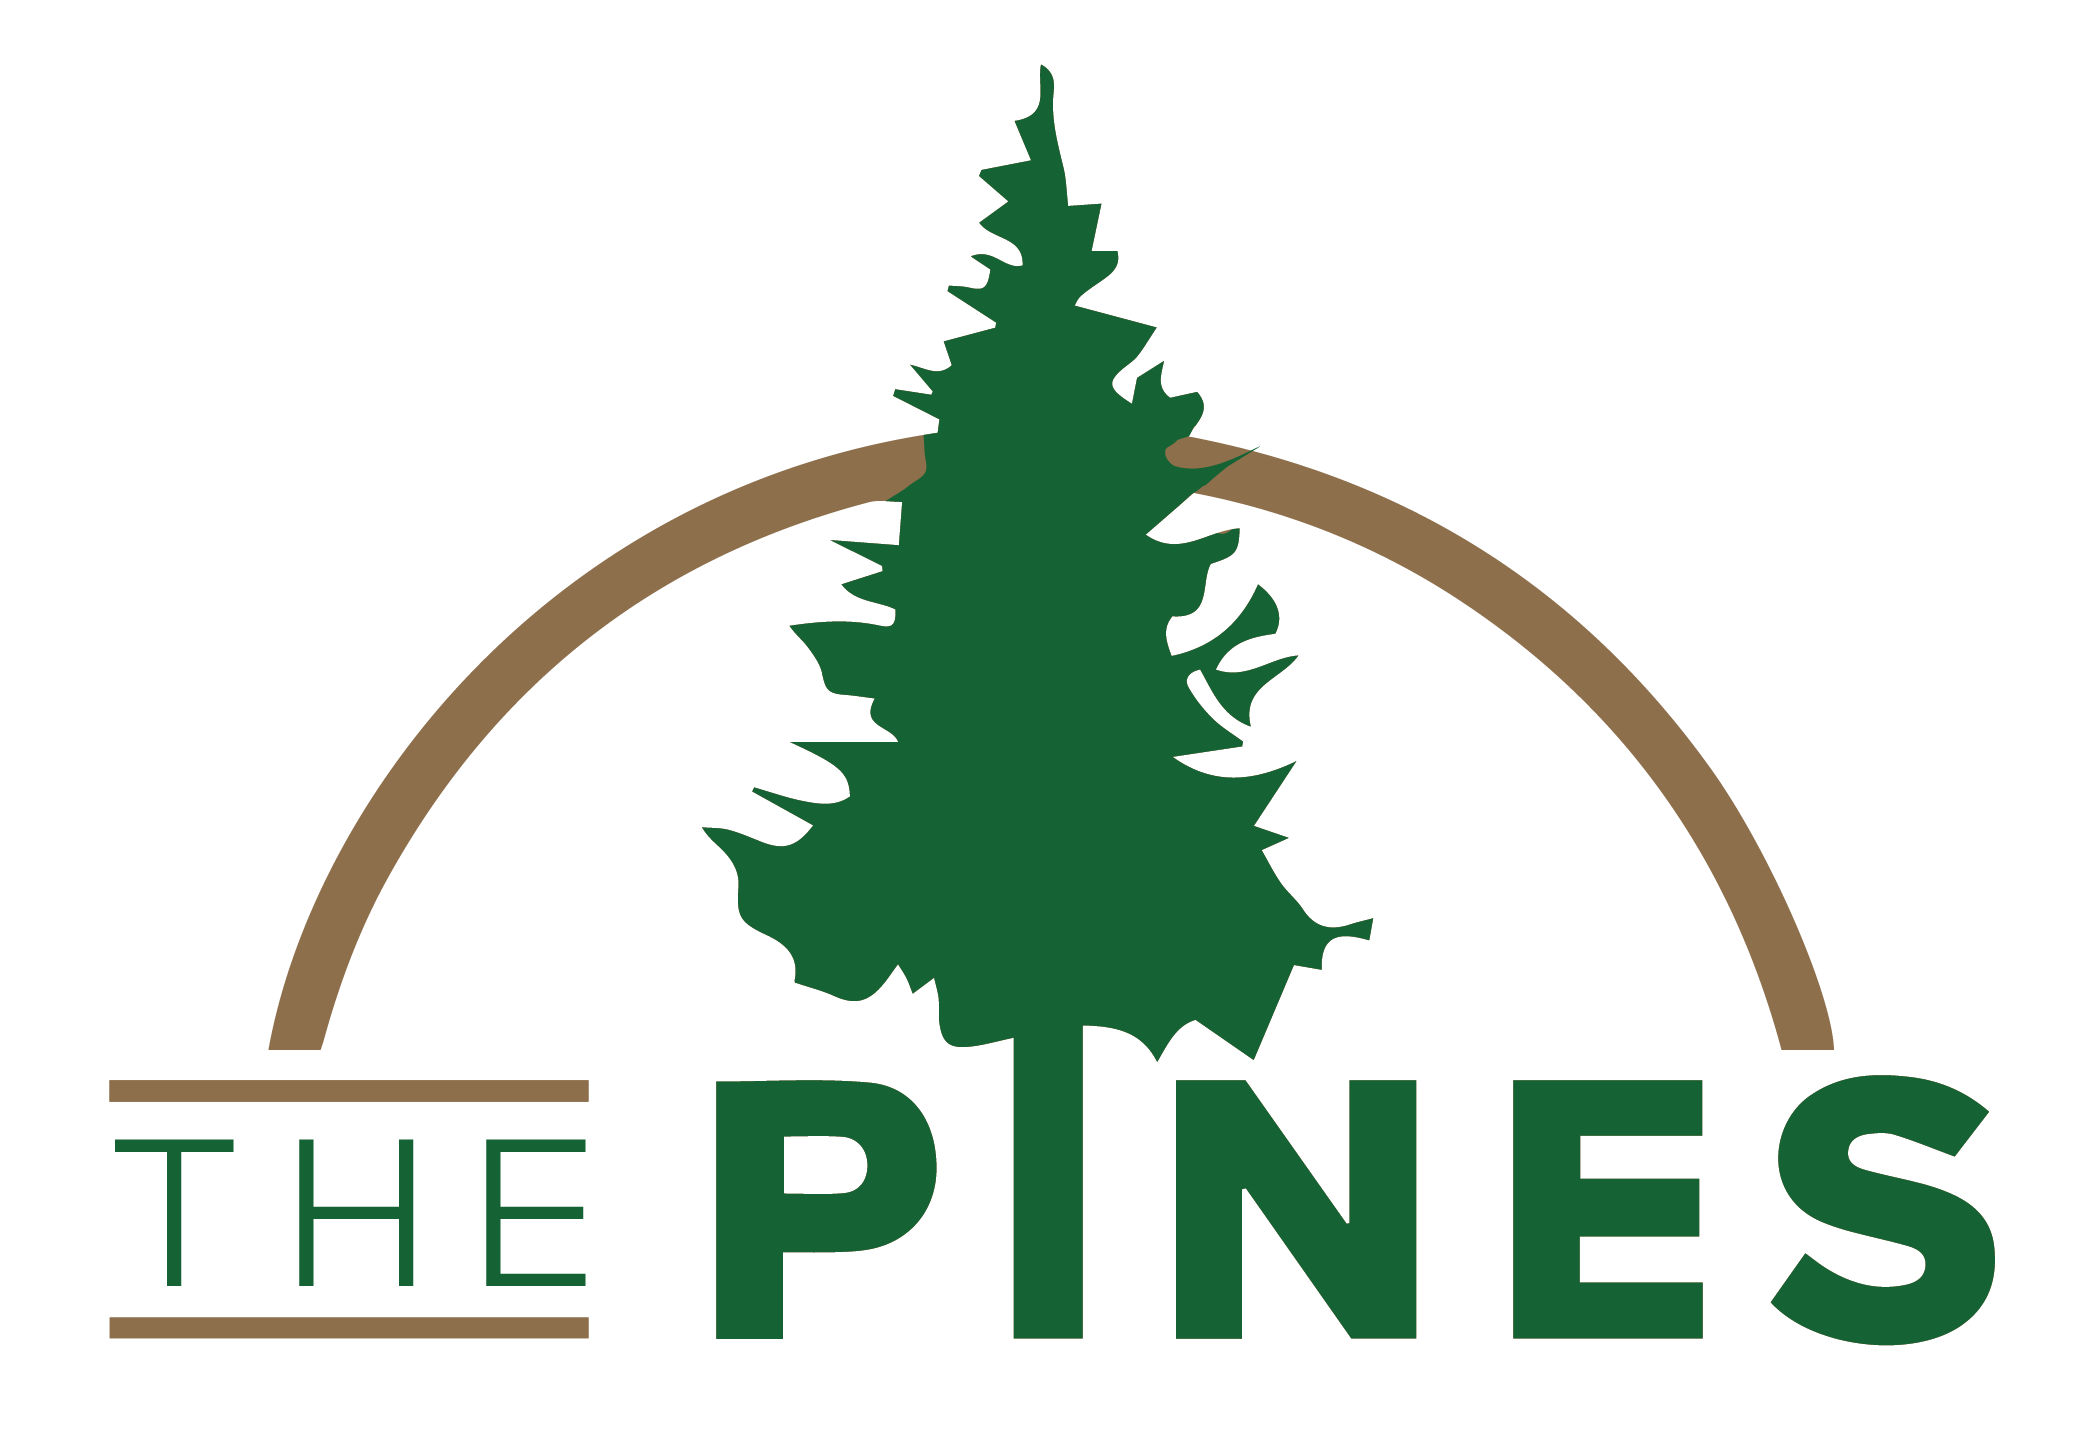 The Pines Promotional Logo